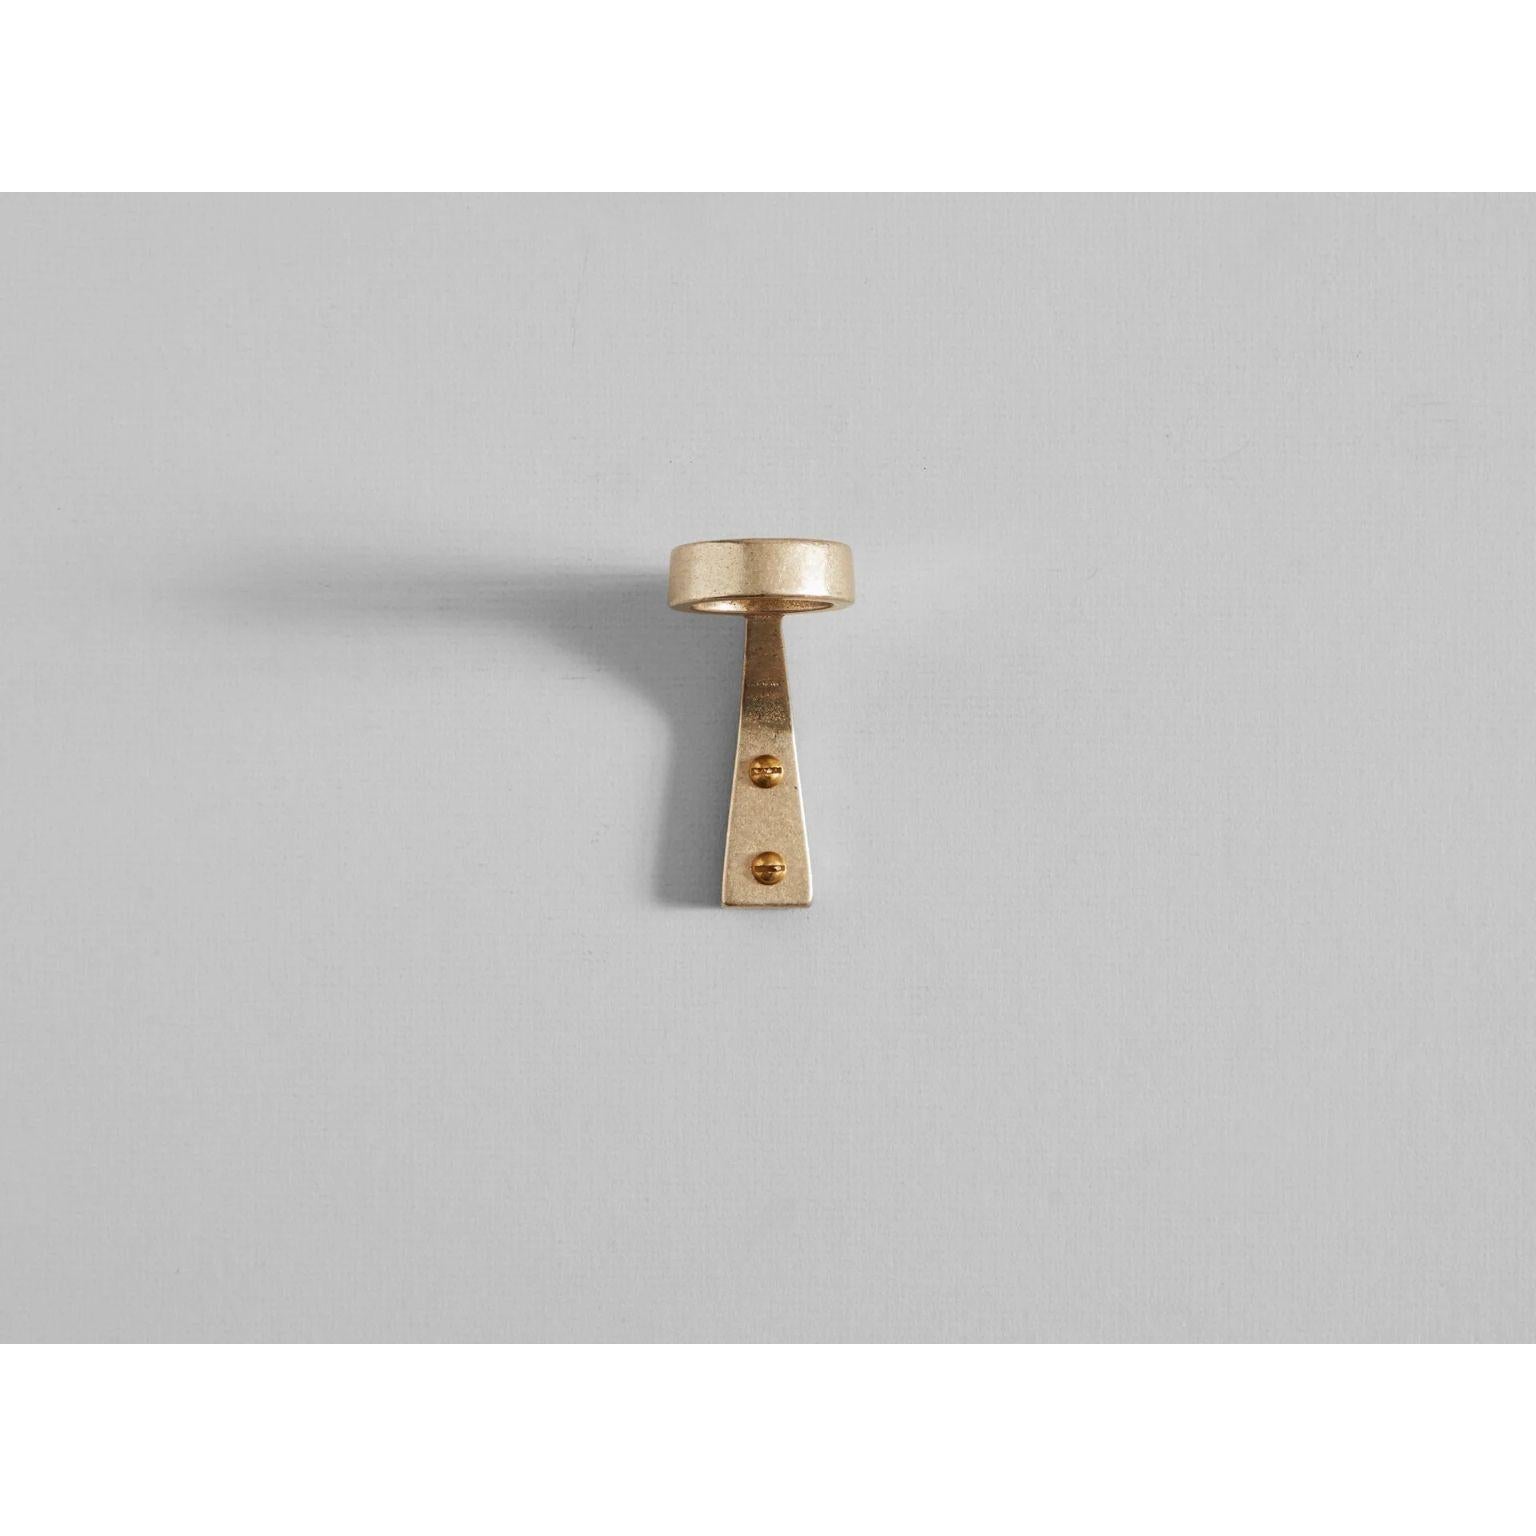 Brass Bottle Bracket by Henry Wilson
Dimensions: W 4 x D 7 x H 8 cm
Materials: Aluminium, Brass, Black Bronze

Bottle Bracket is a solid, hand poured brass form available in dual or single bottle configuration.
The Bottle Bracket is manufactured in